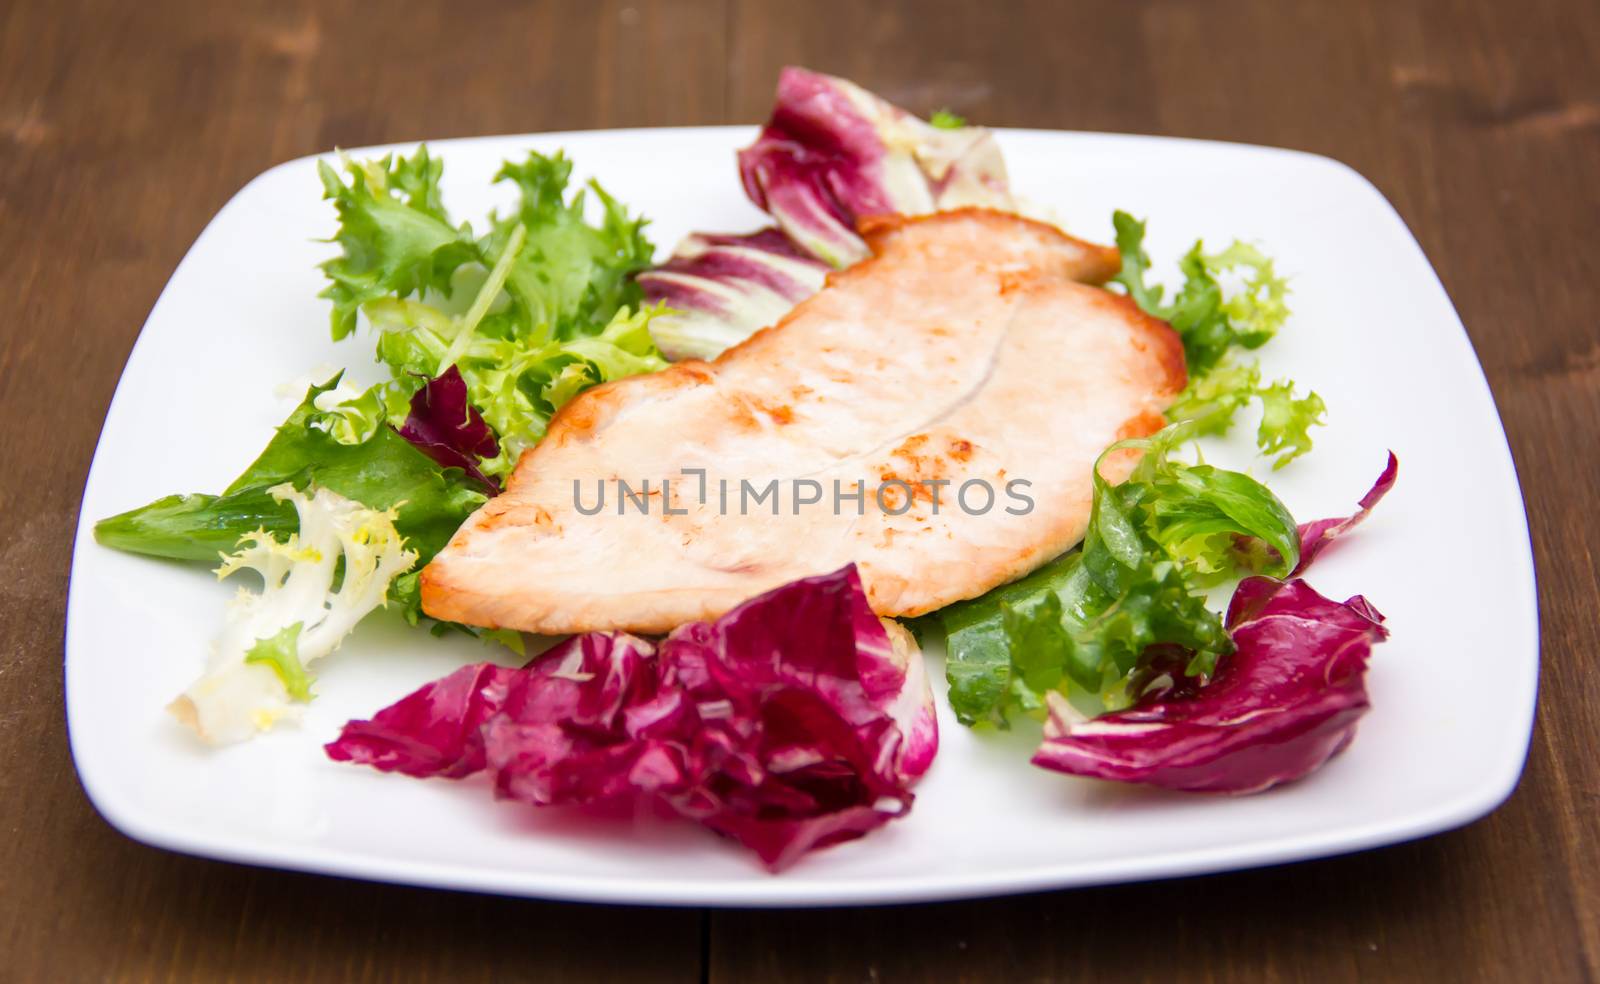 Chicken and salad on plate on wooden table